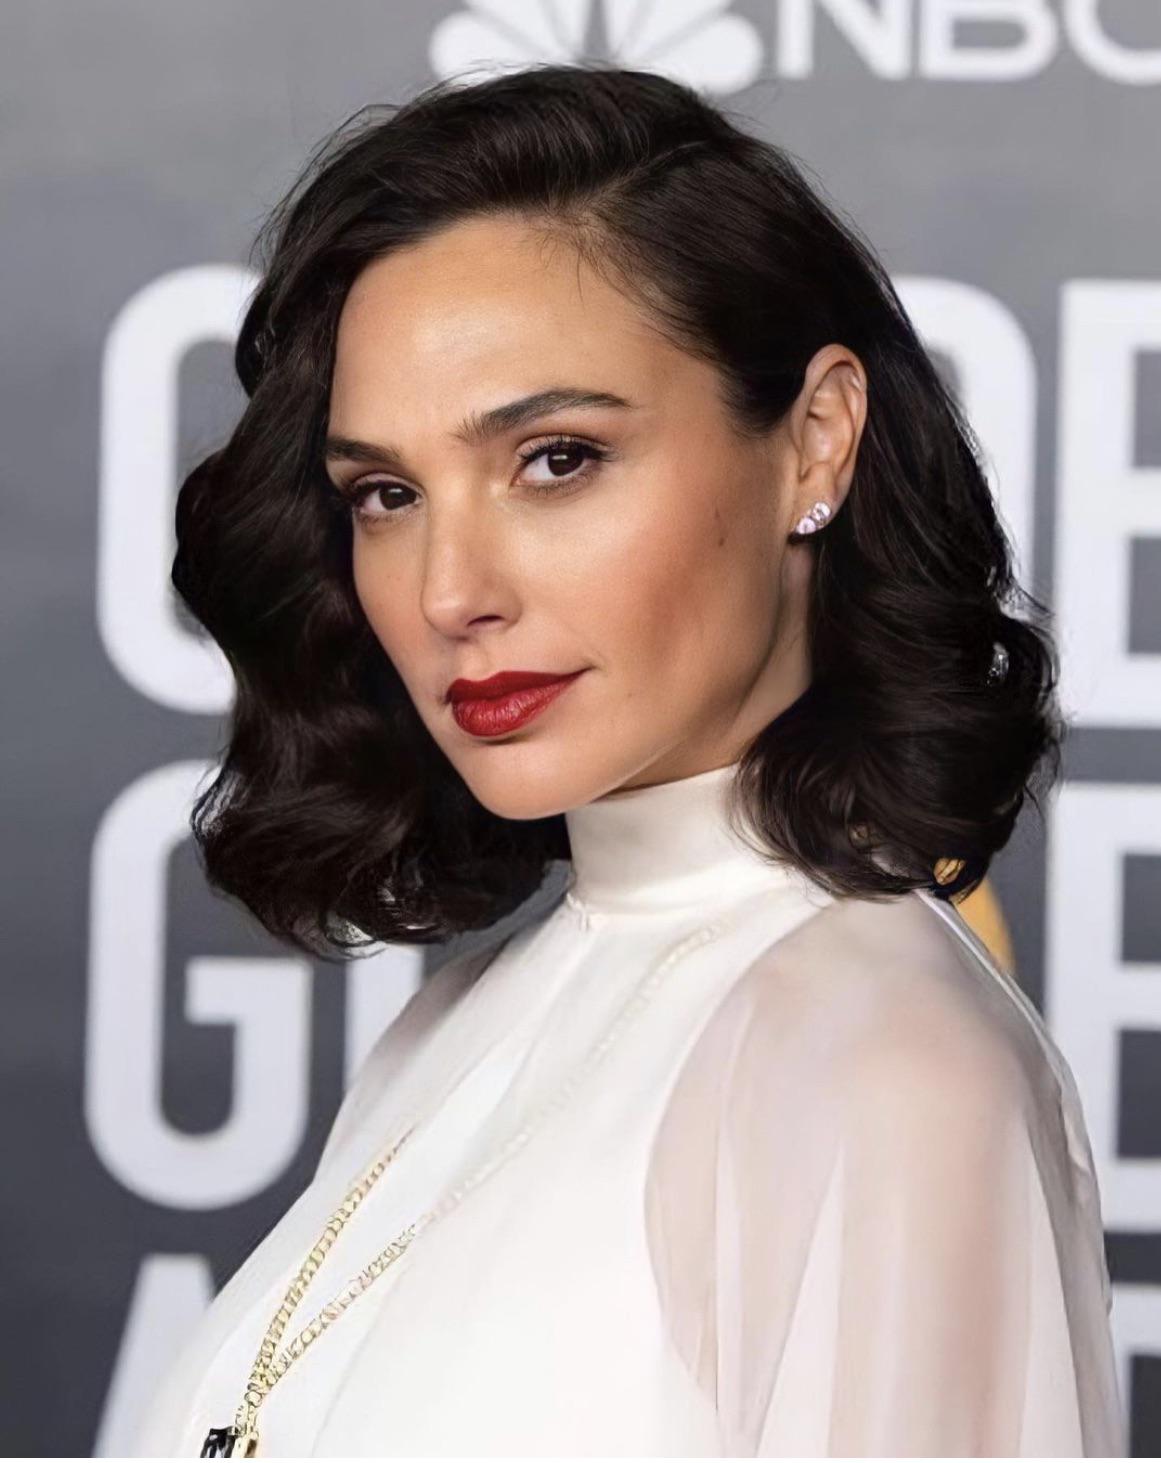 A Sensual Blowjob From Gal Gadot Would Be Heavenly Scrolller